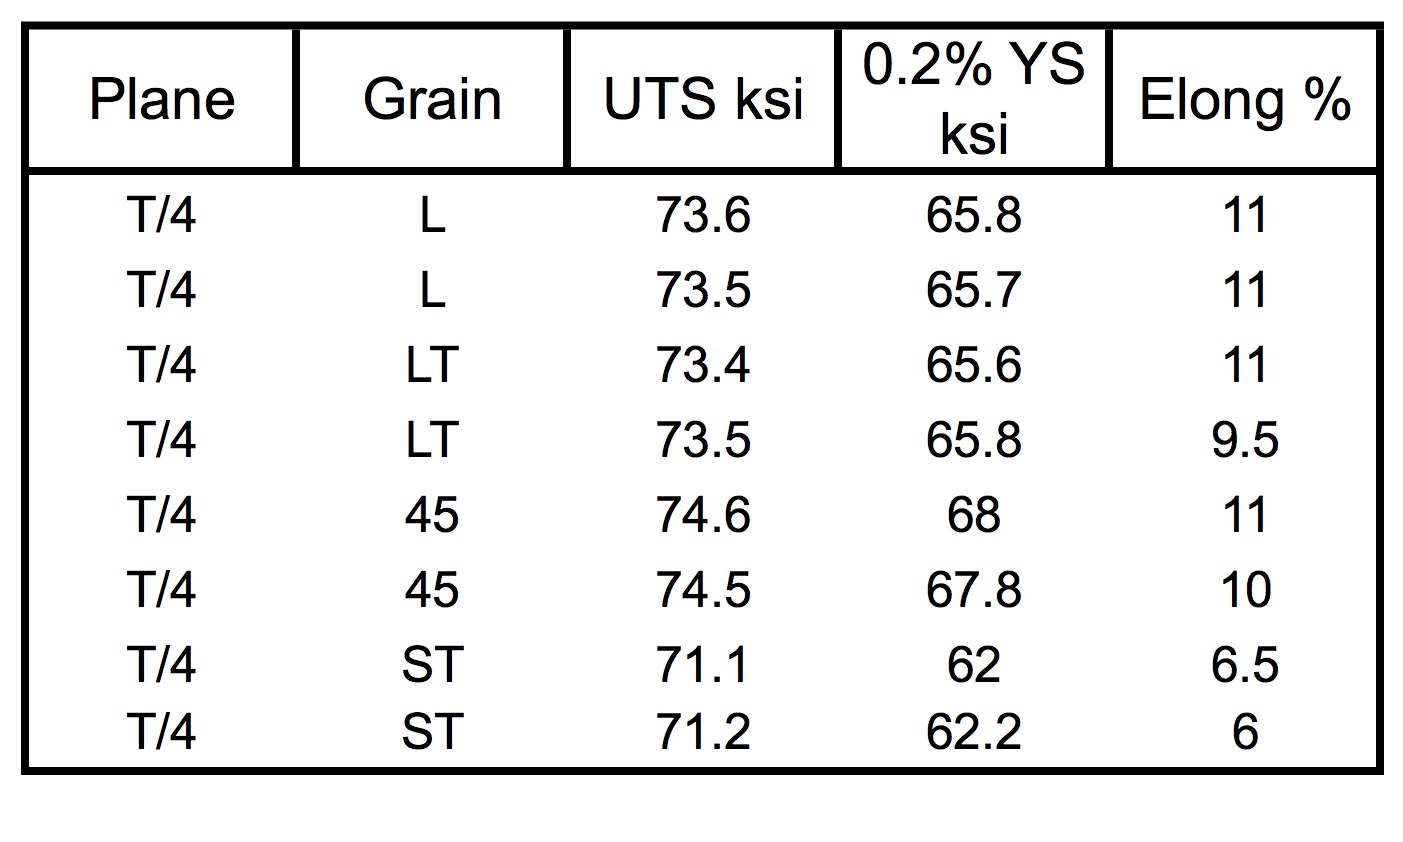 Table II. Tensile properties of the finished 2050 cone subcomponent tested at T/4 plate.